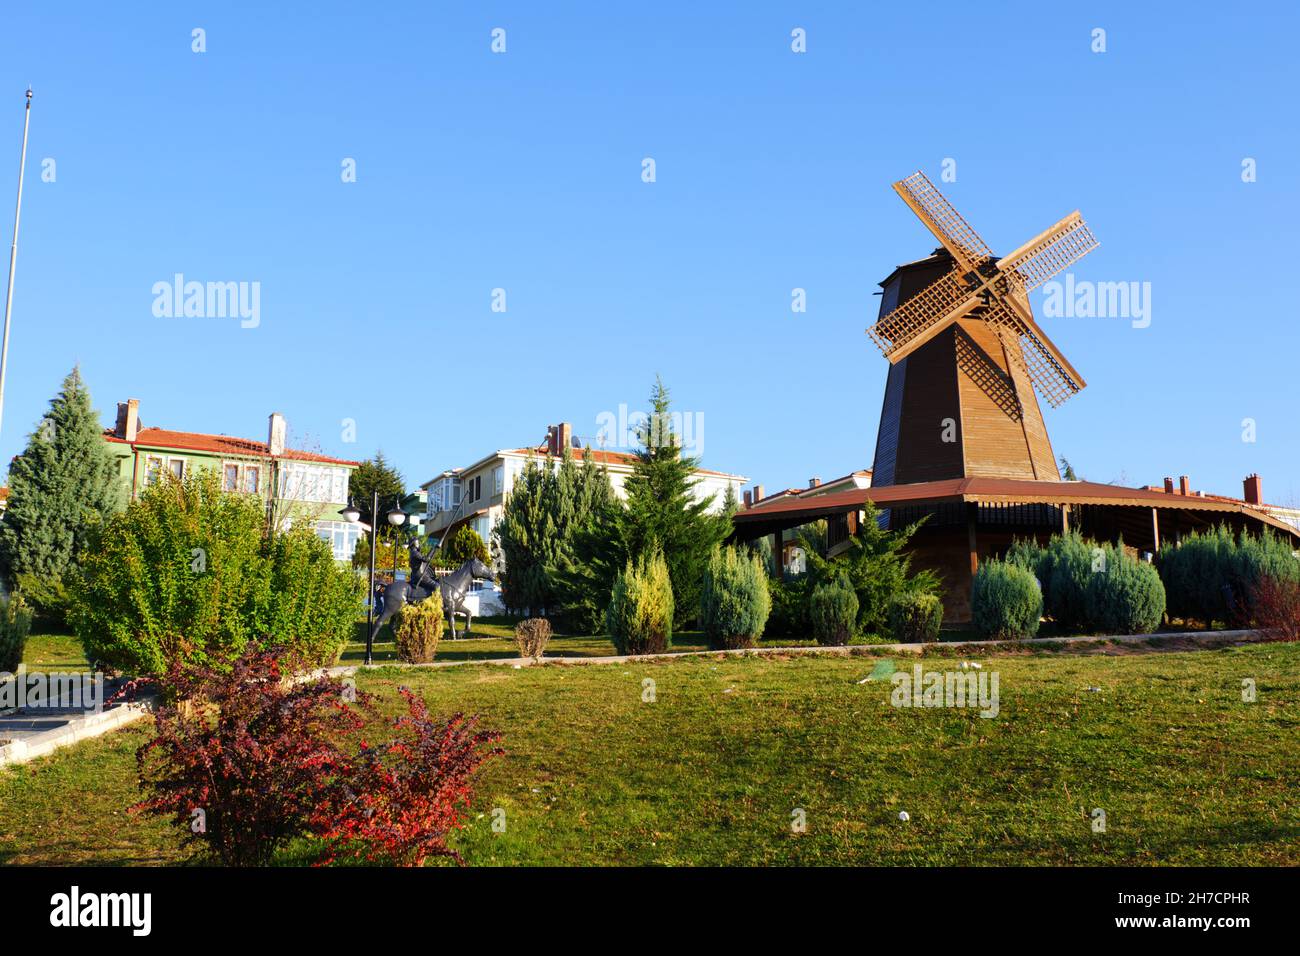 Vintage wooden windmill tower over bushes at Selale Park Eskisehir Turkey Stock Photo